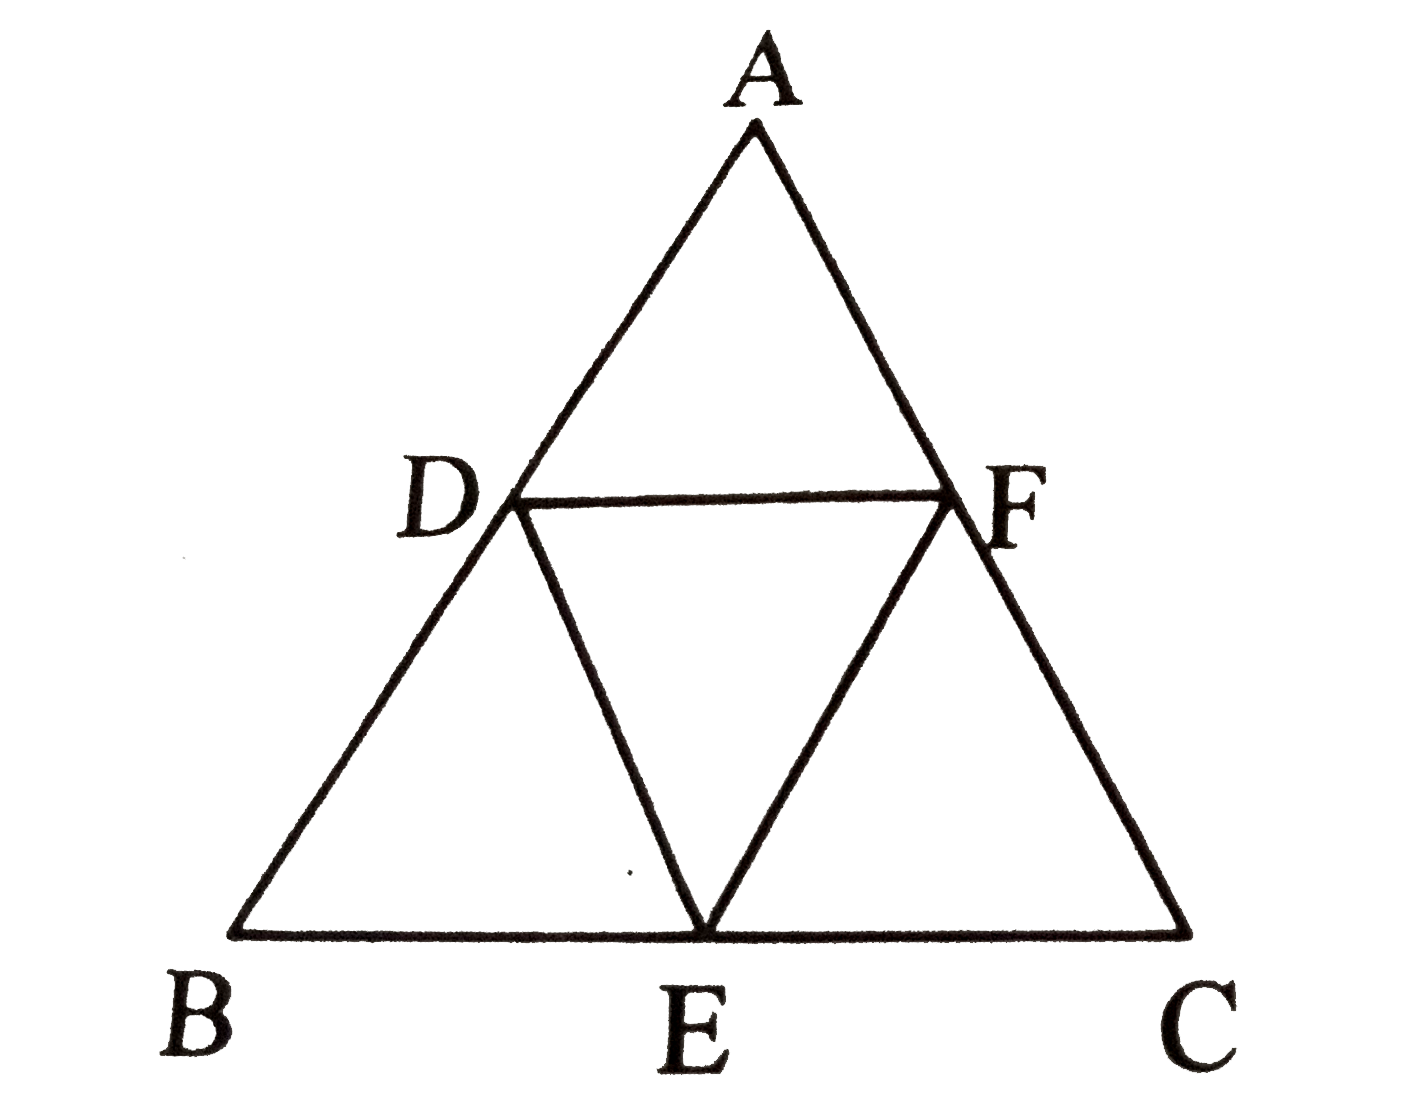 Points D, E and F are the midpoints of sides AB, BC, and AC of  DeltaABC . If DE = 10 cm, EF = 12 cm and DF = 8 cm, then find AB.